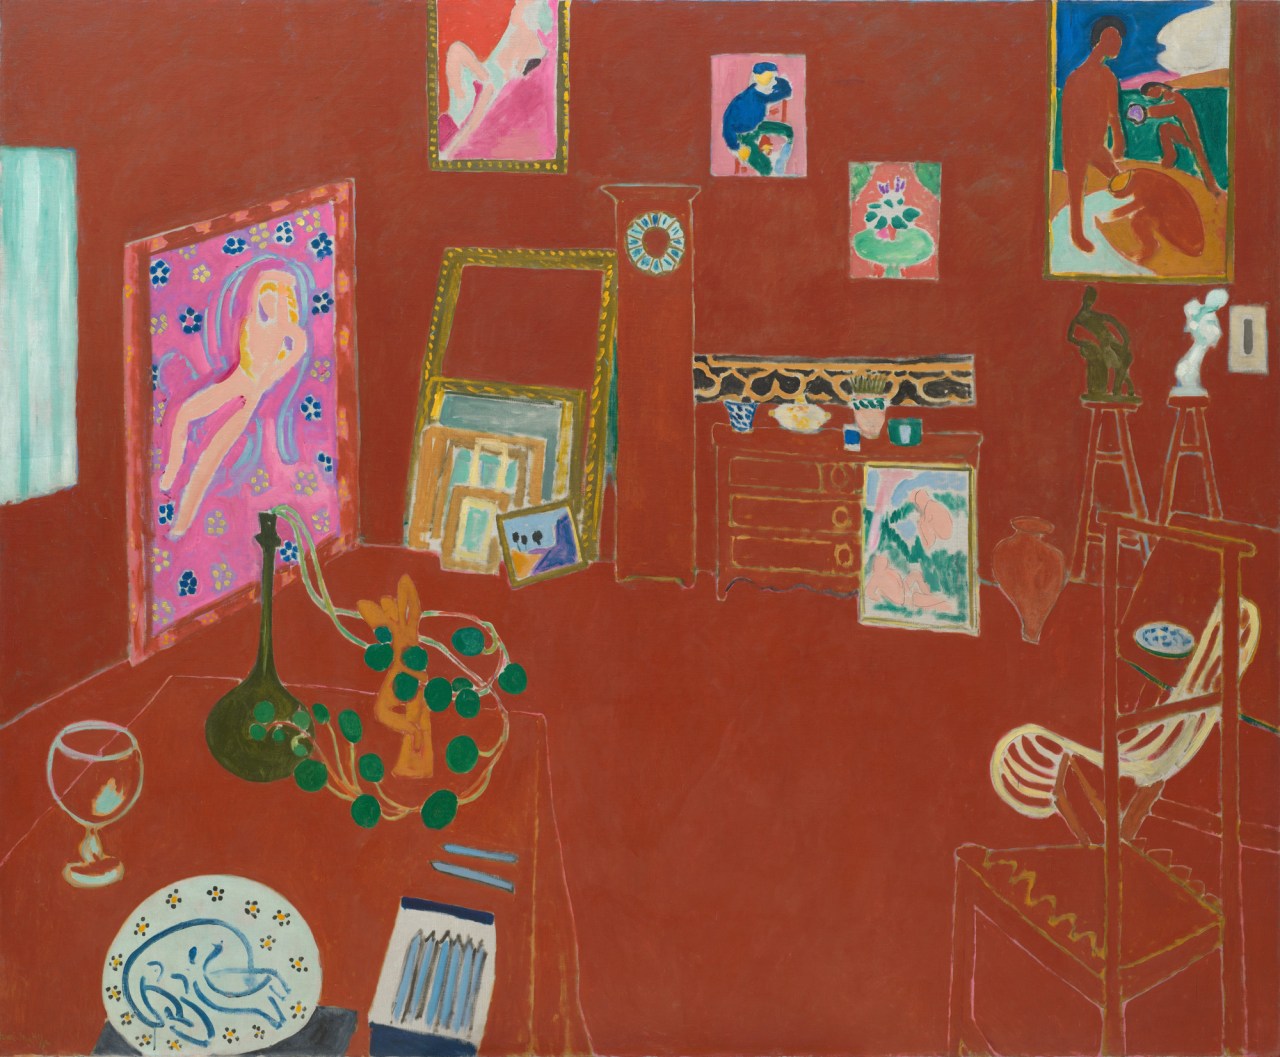 MATTERS OF OBSESSION: A personal contemplation on Henri Matisse’s The Red Studio — L’Atelier Rouge